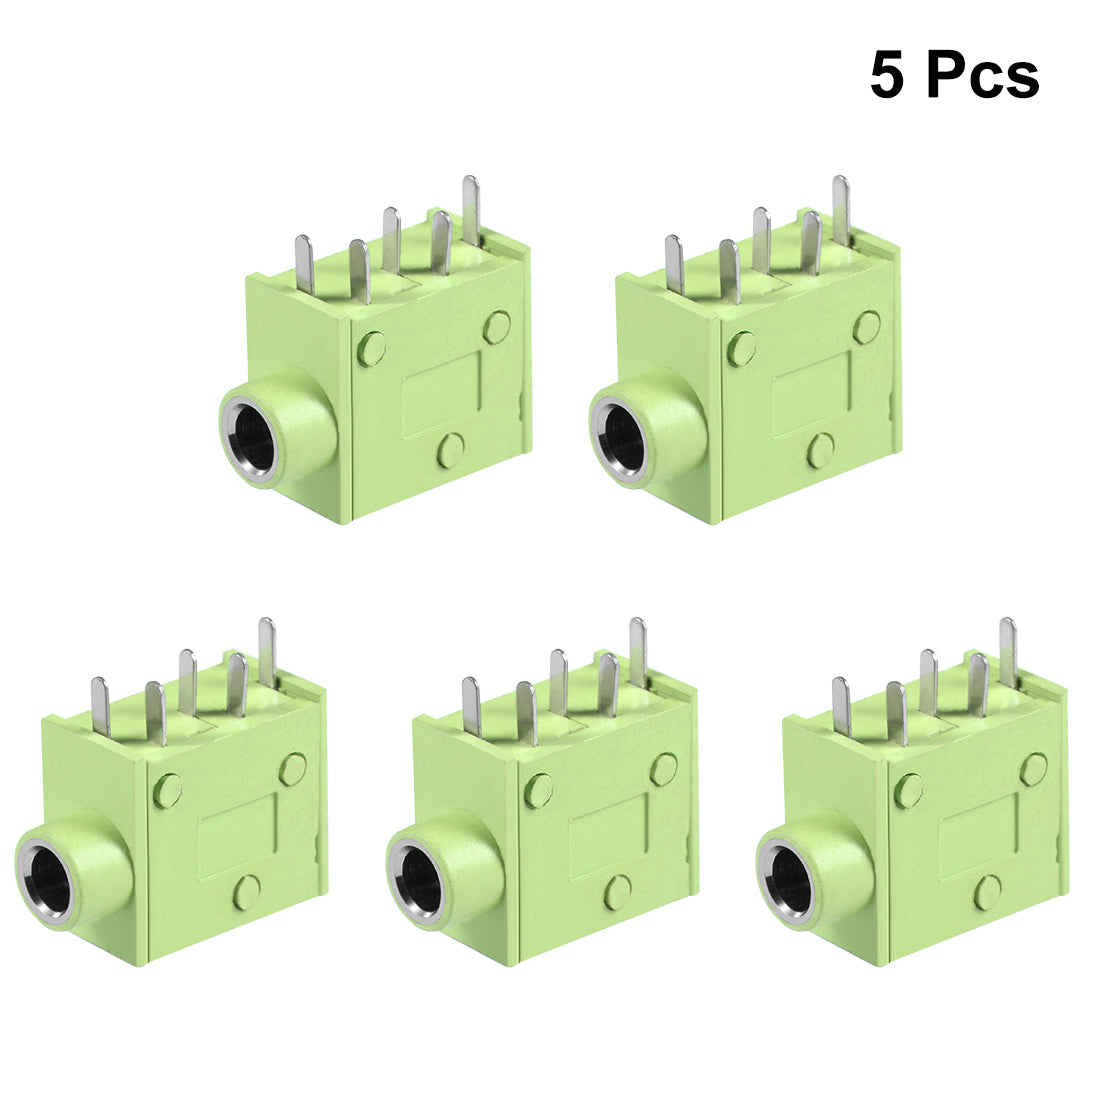 uxcell Uxcell 5Pcs PCB Mount 3.5mm 5 Pin Socket Headphone Stereo Jack Audio Video Connector Green PJ325